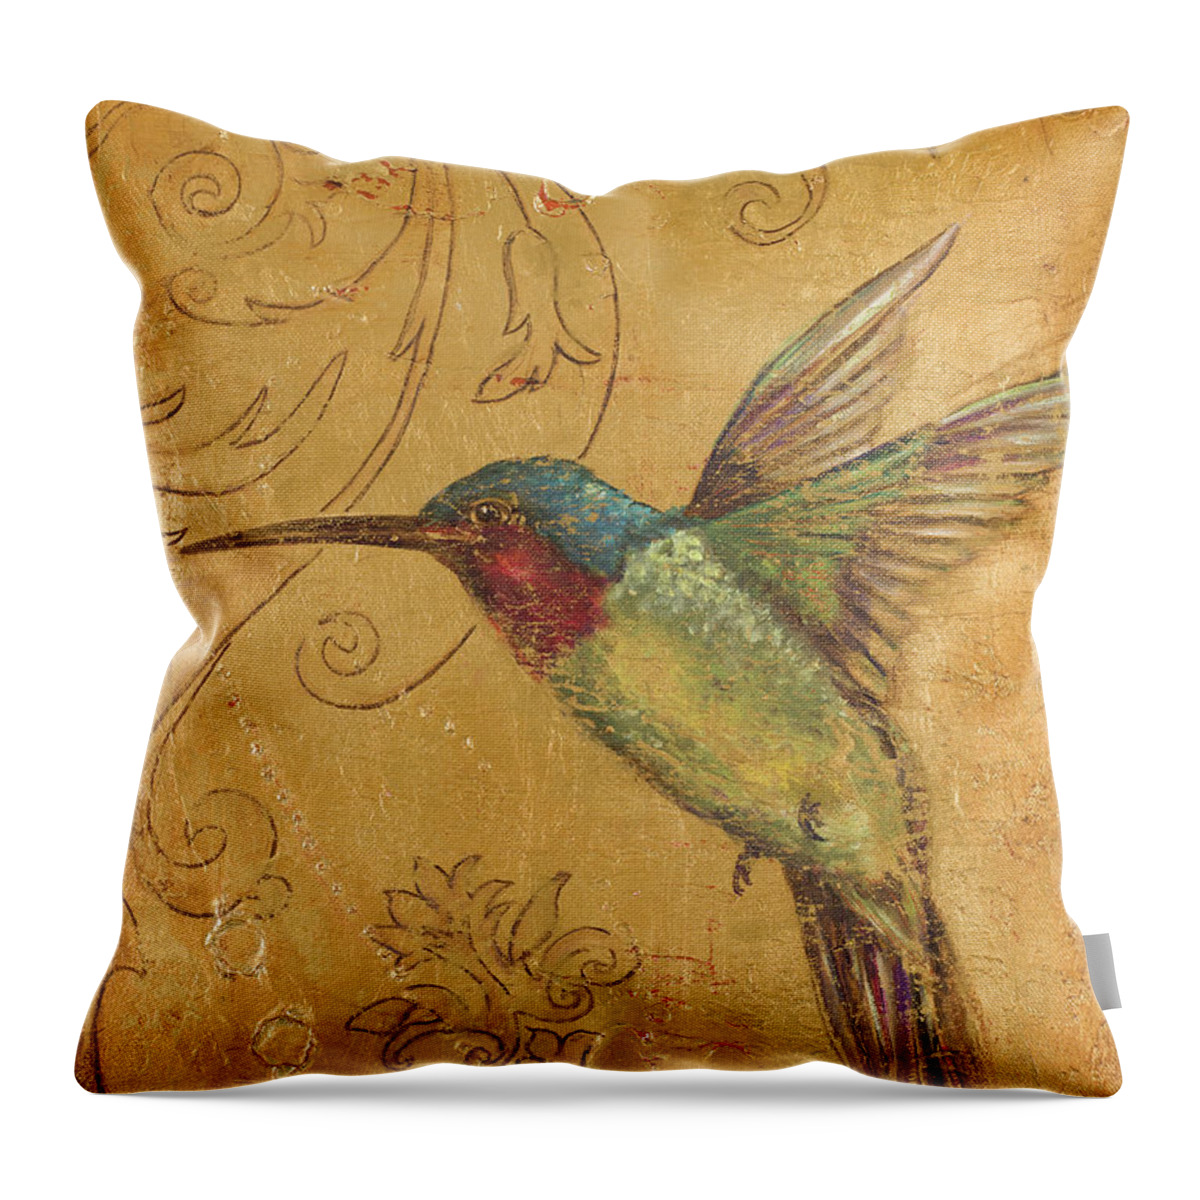 Hummingbird Throw Pillow featuring the painting Golden Hummingbird II by Patricia Pinto